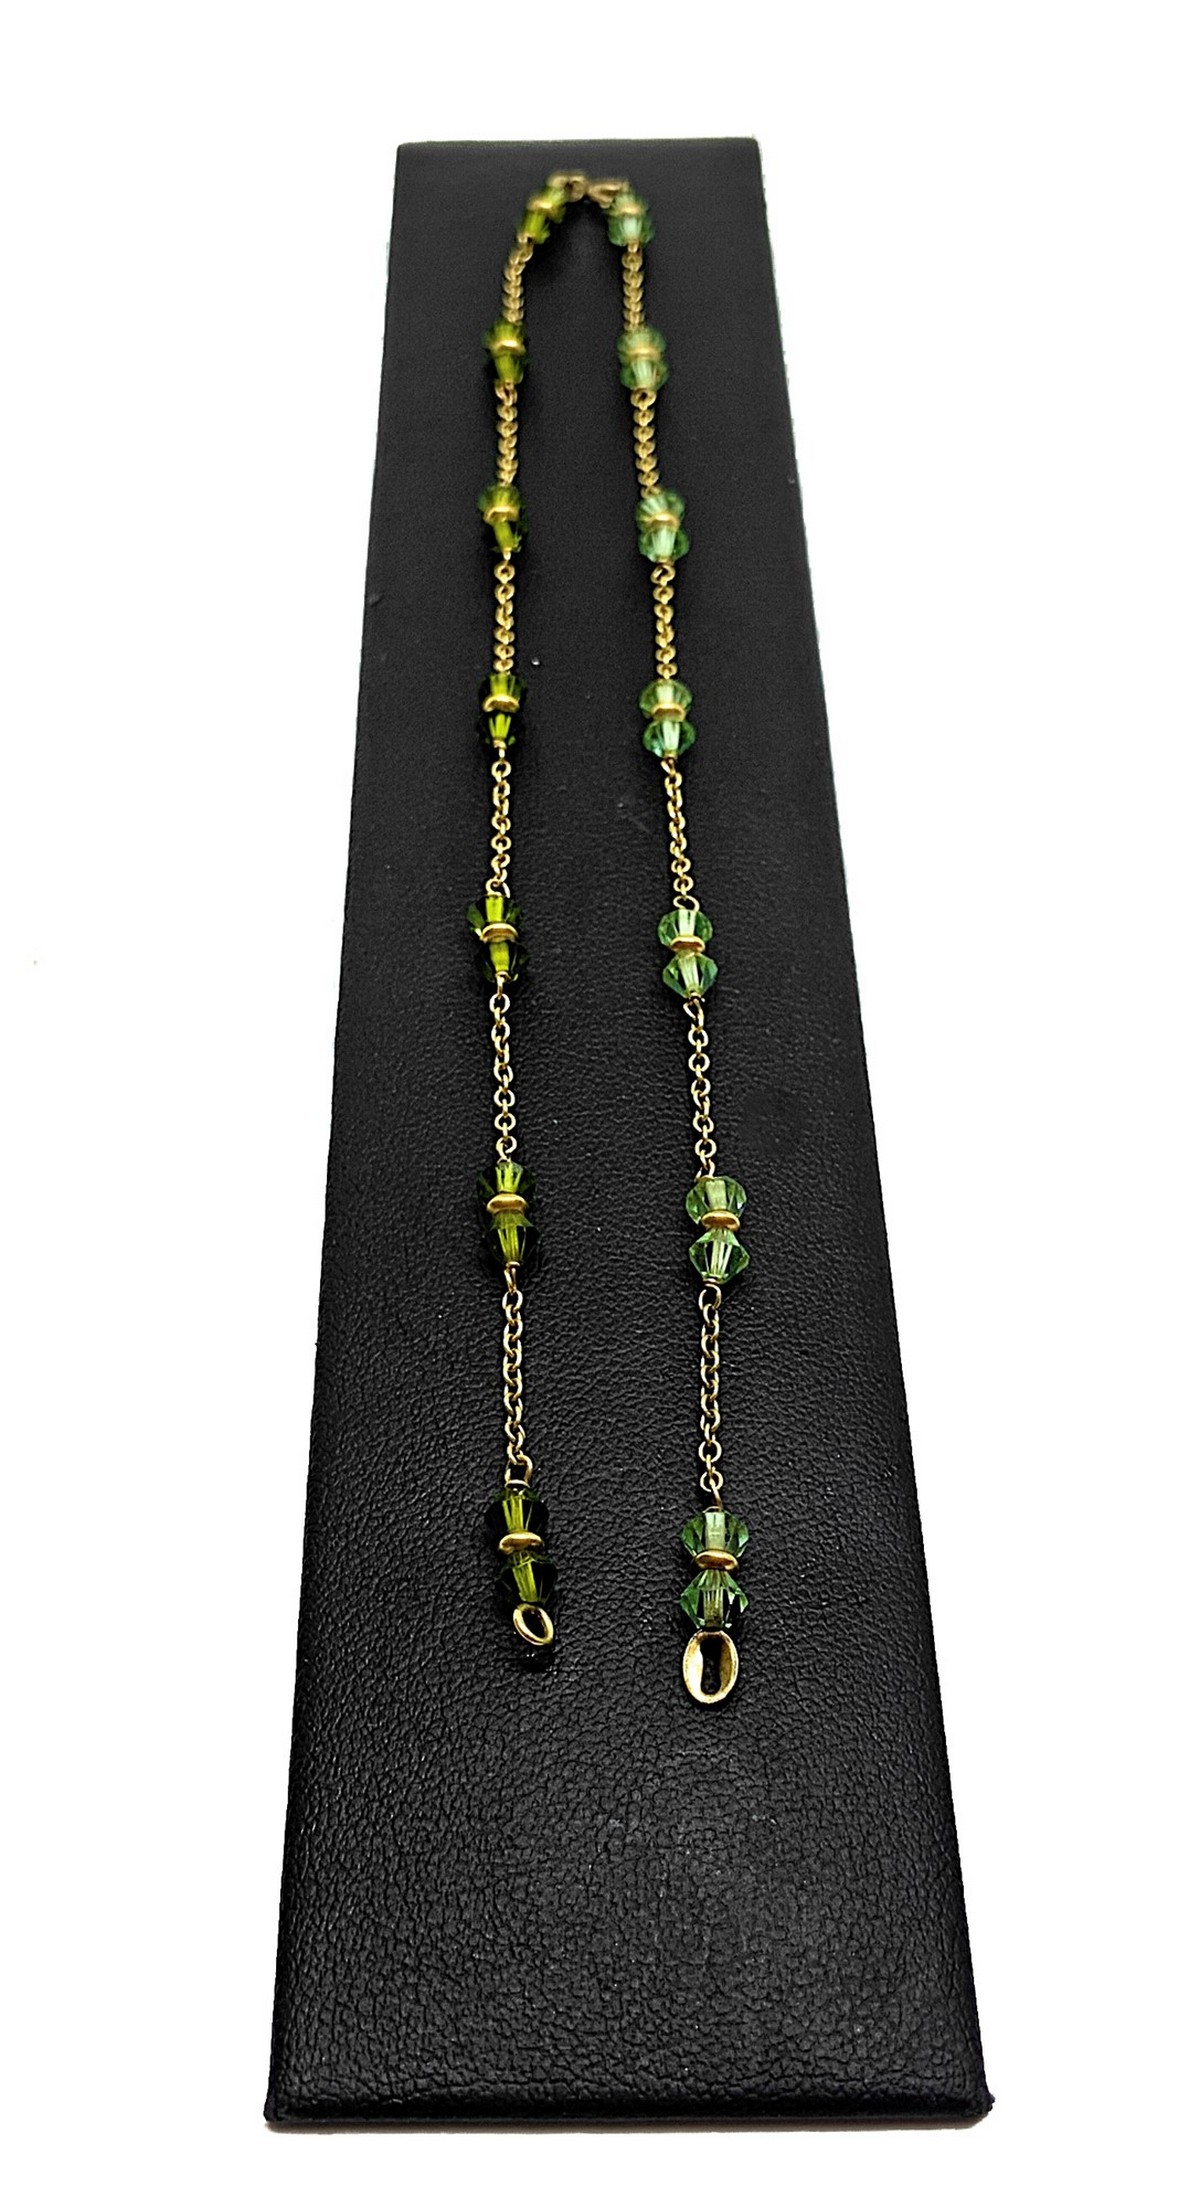 Earrings and bracelet set, 20th century - Image 8 of 9